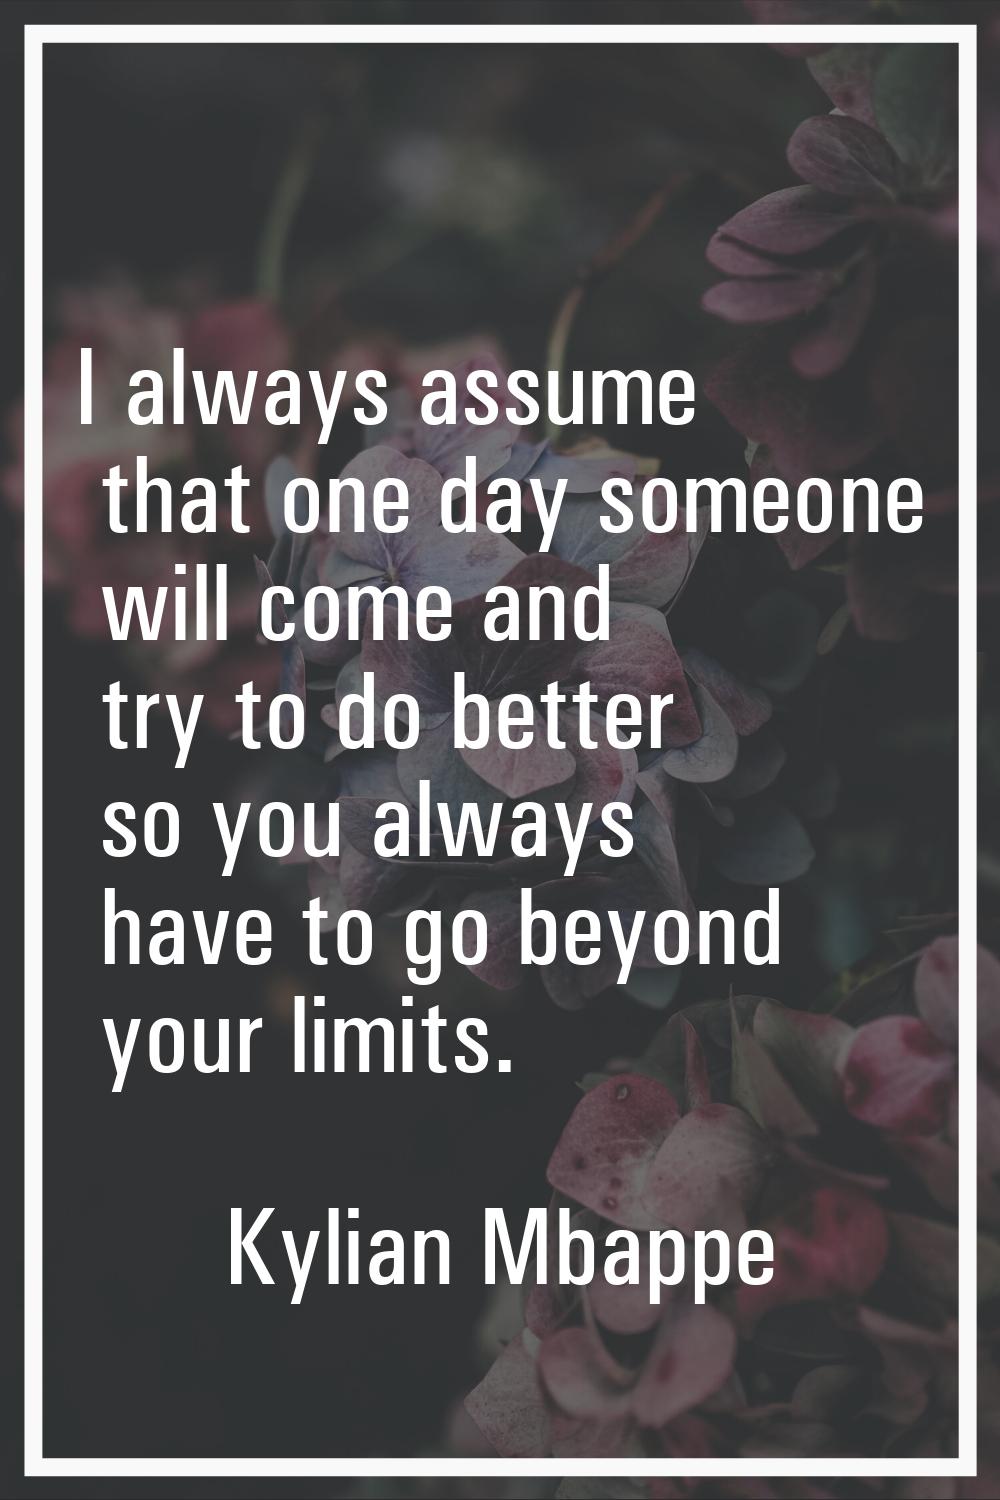 I always assume that one day someone will come and try to do better so you always have to go beyond